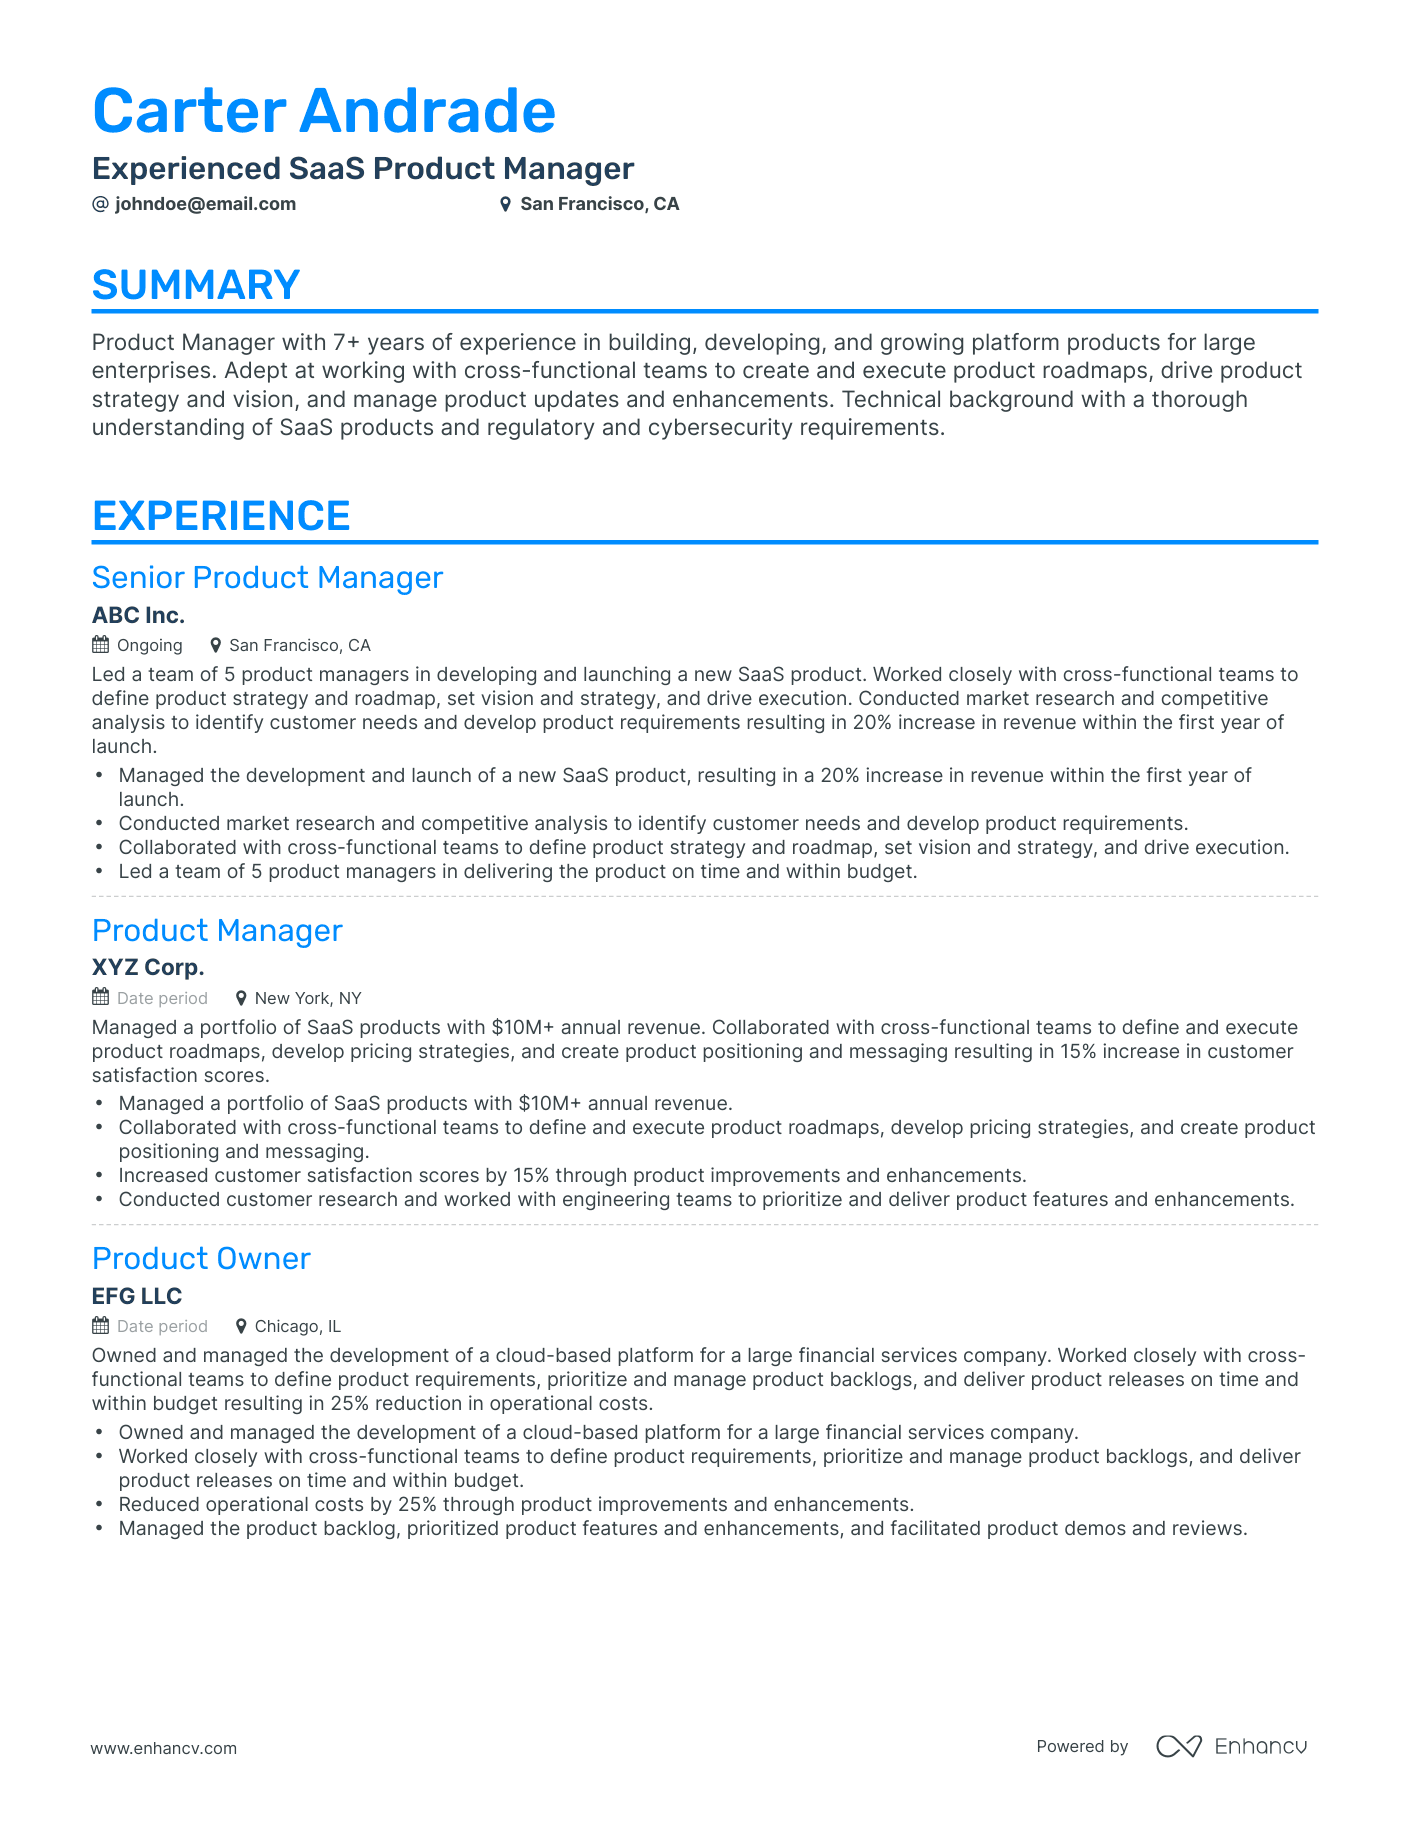 Classic SaaS Product Manager Resume Template